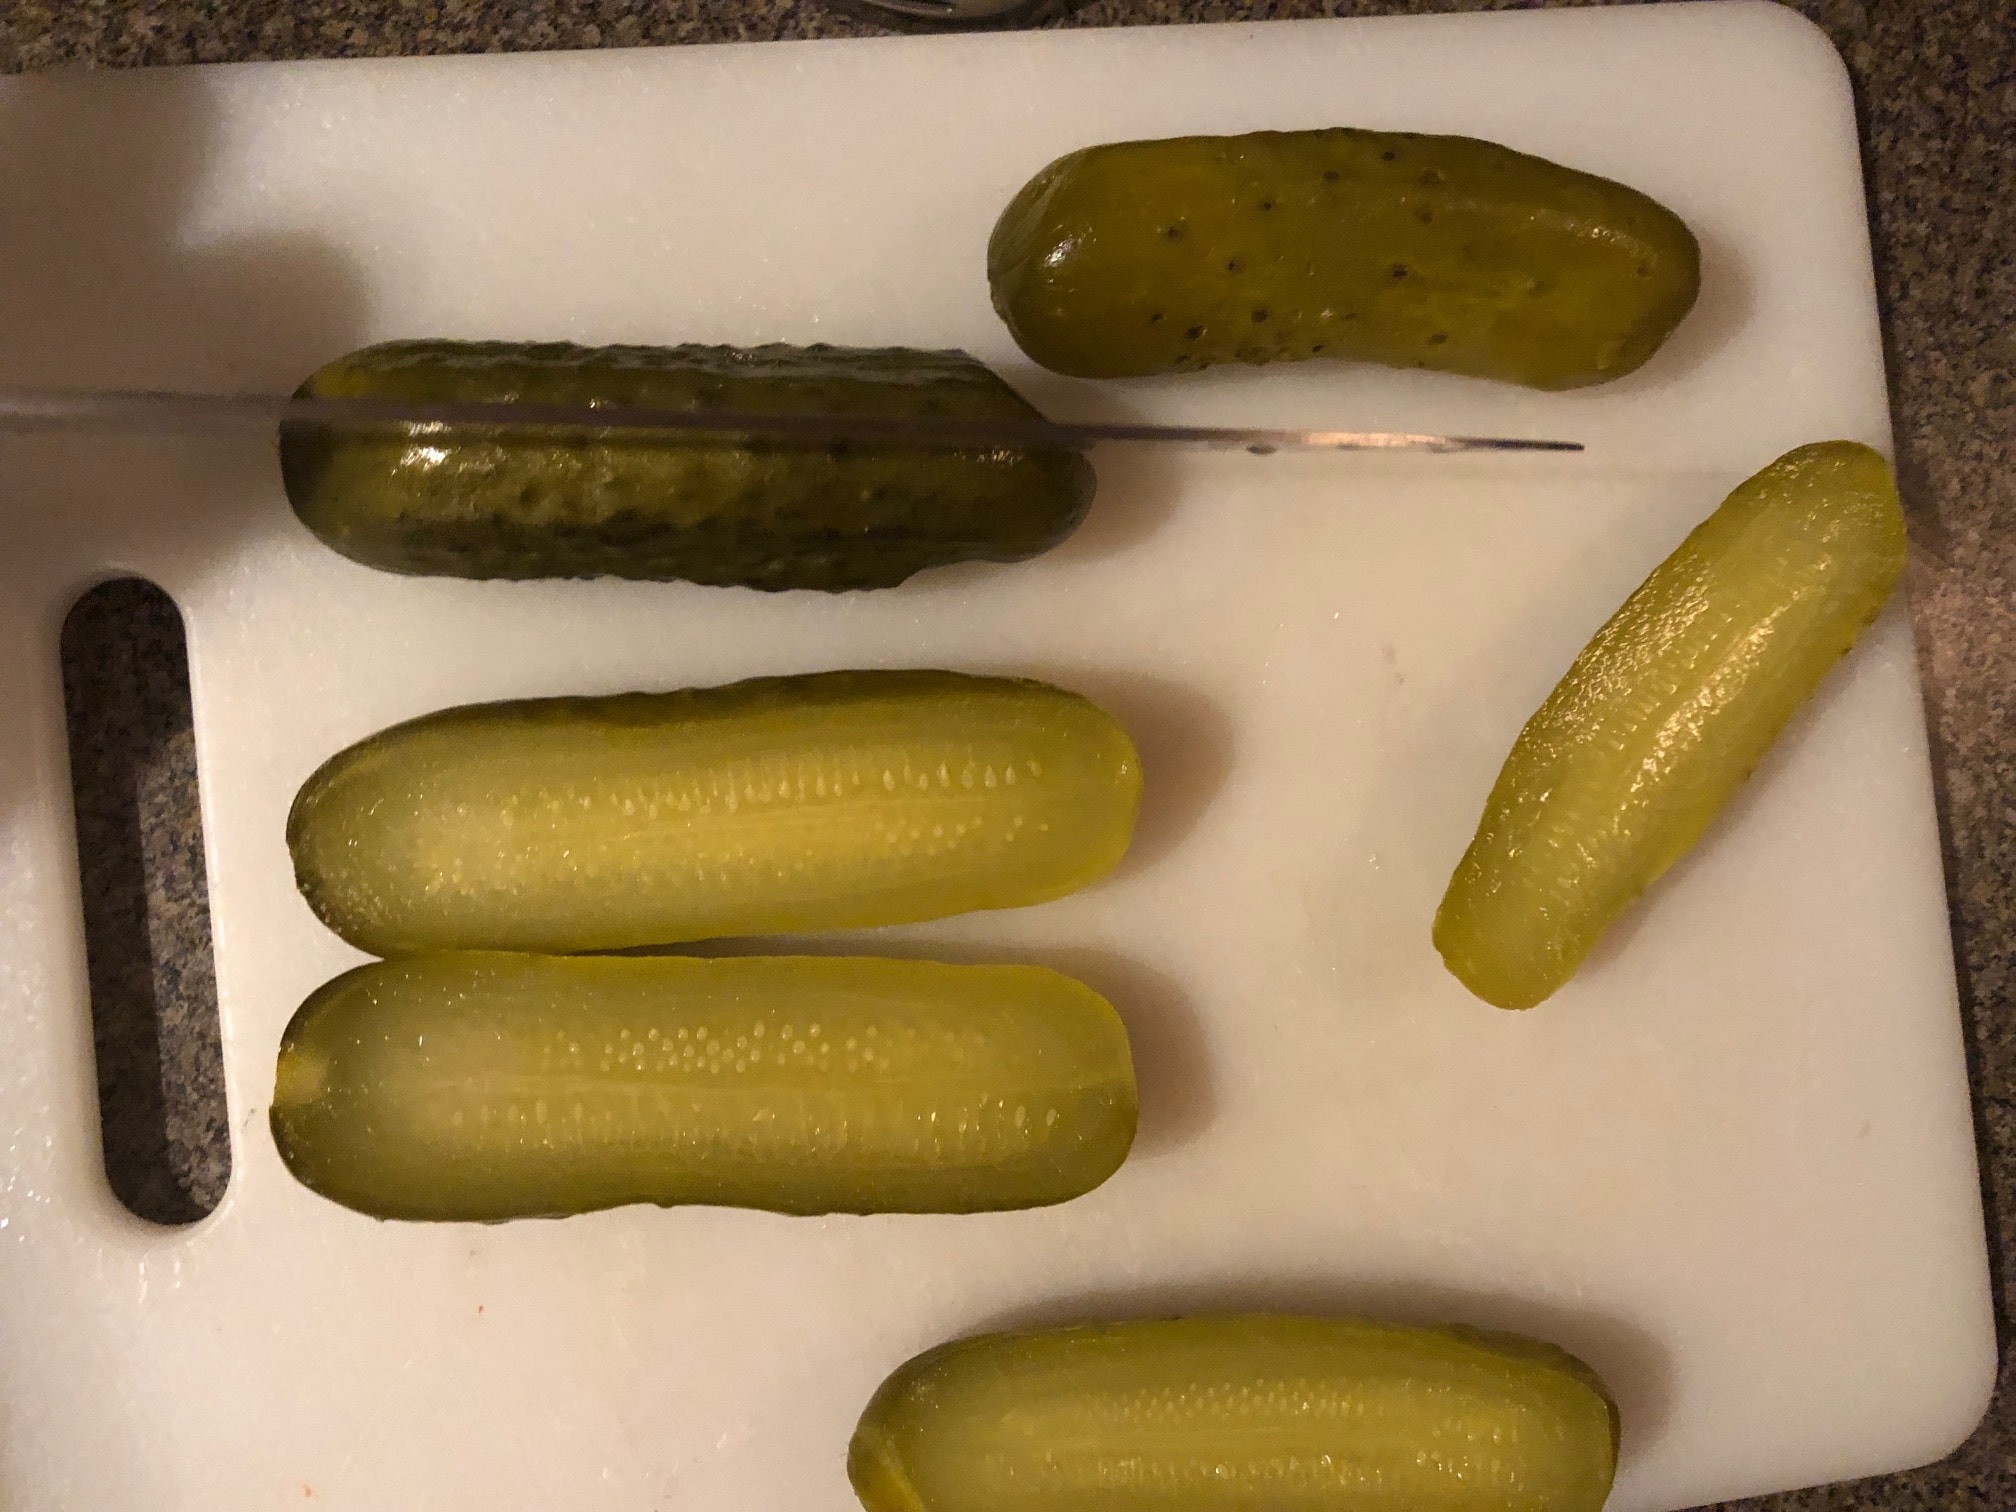 Pickles being sliced in half, lengthwise